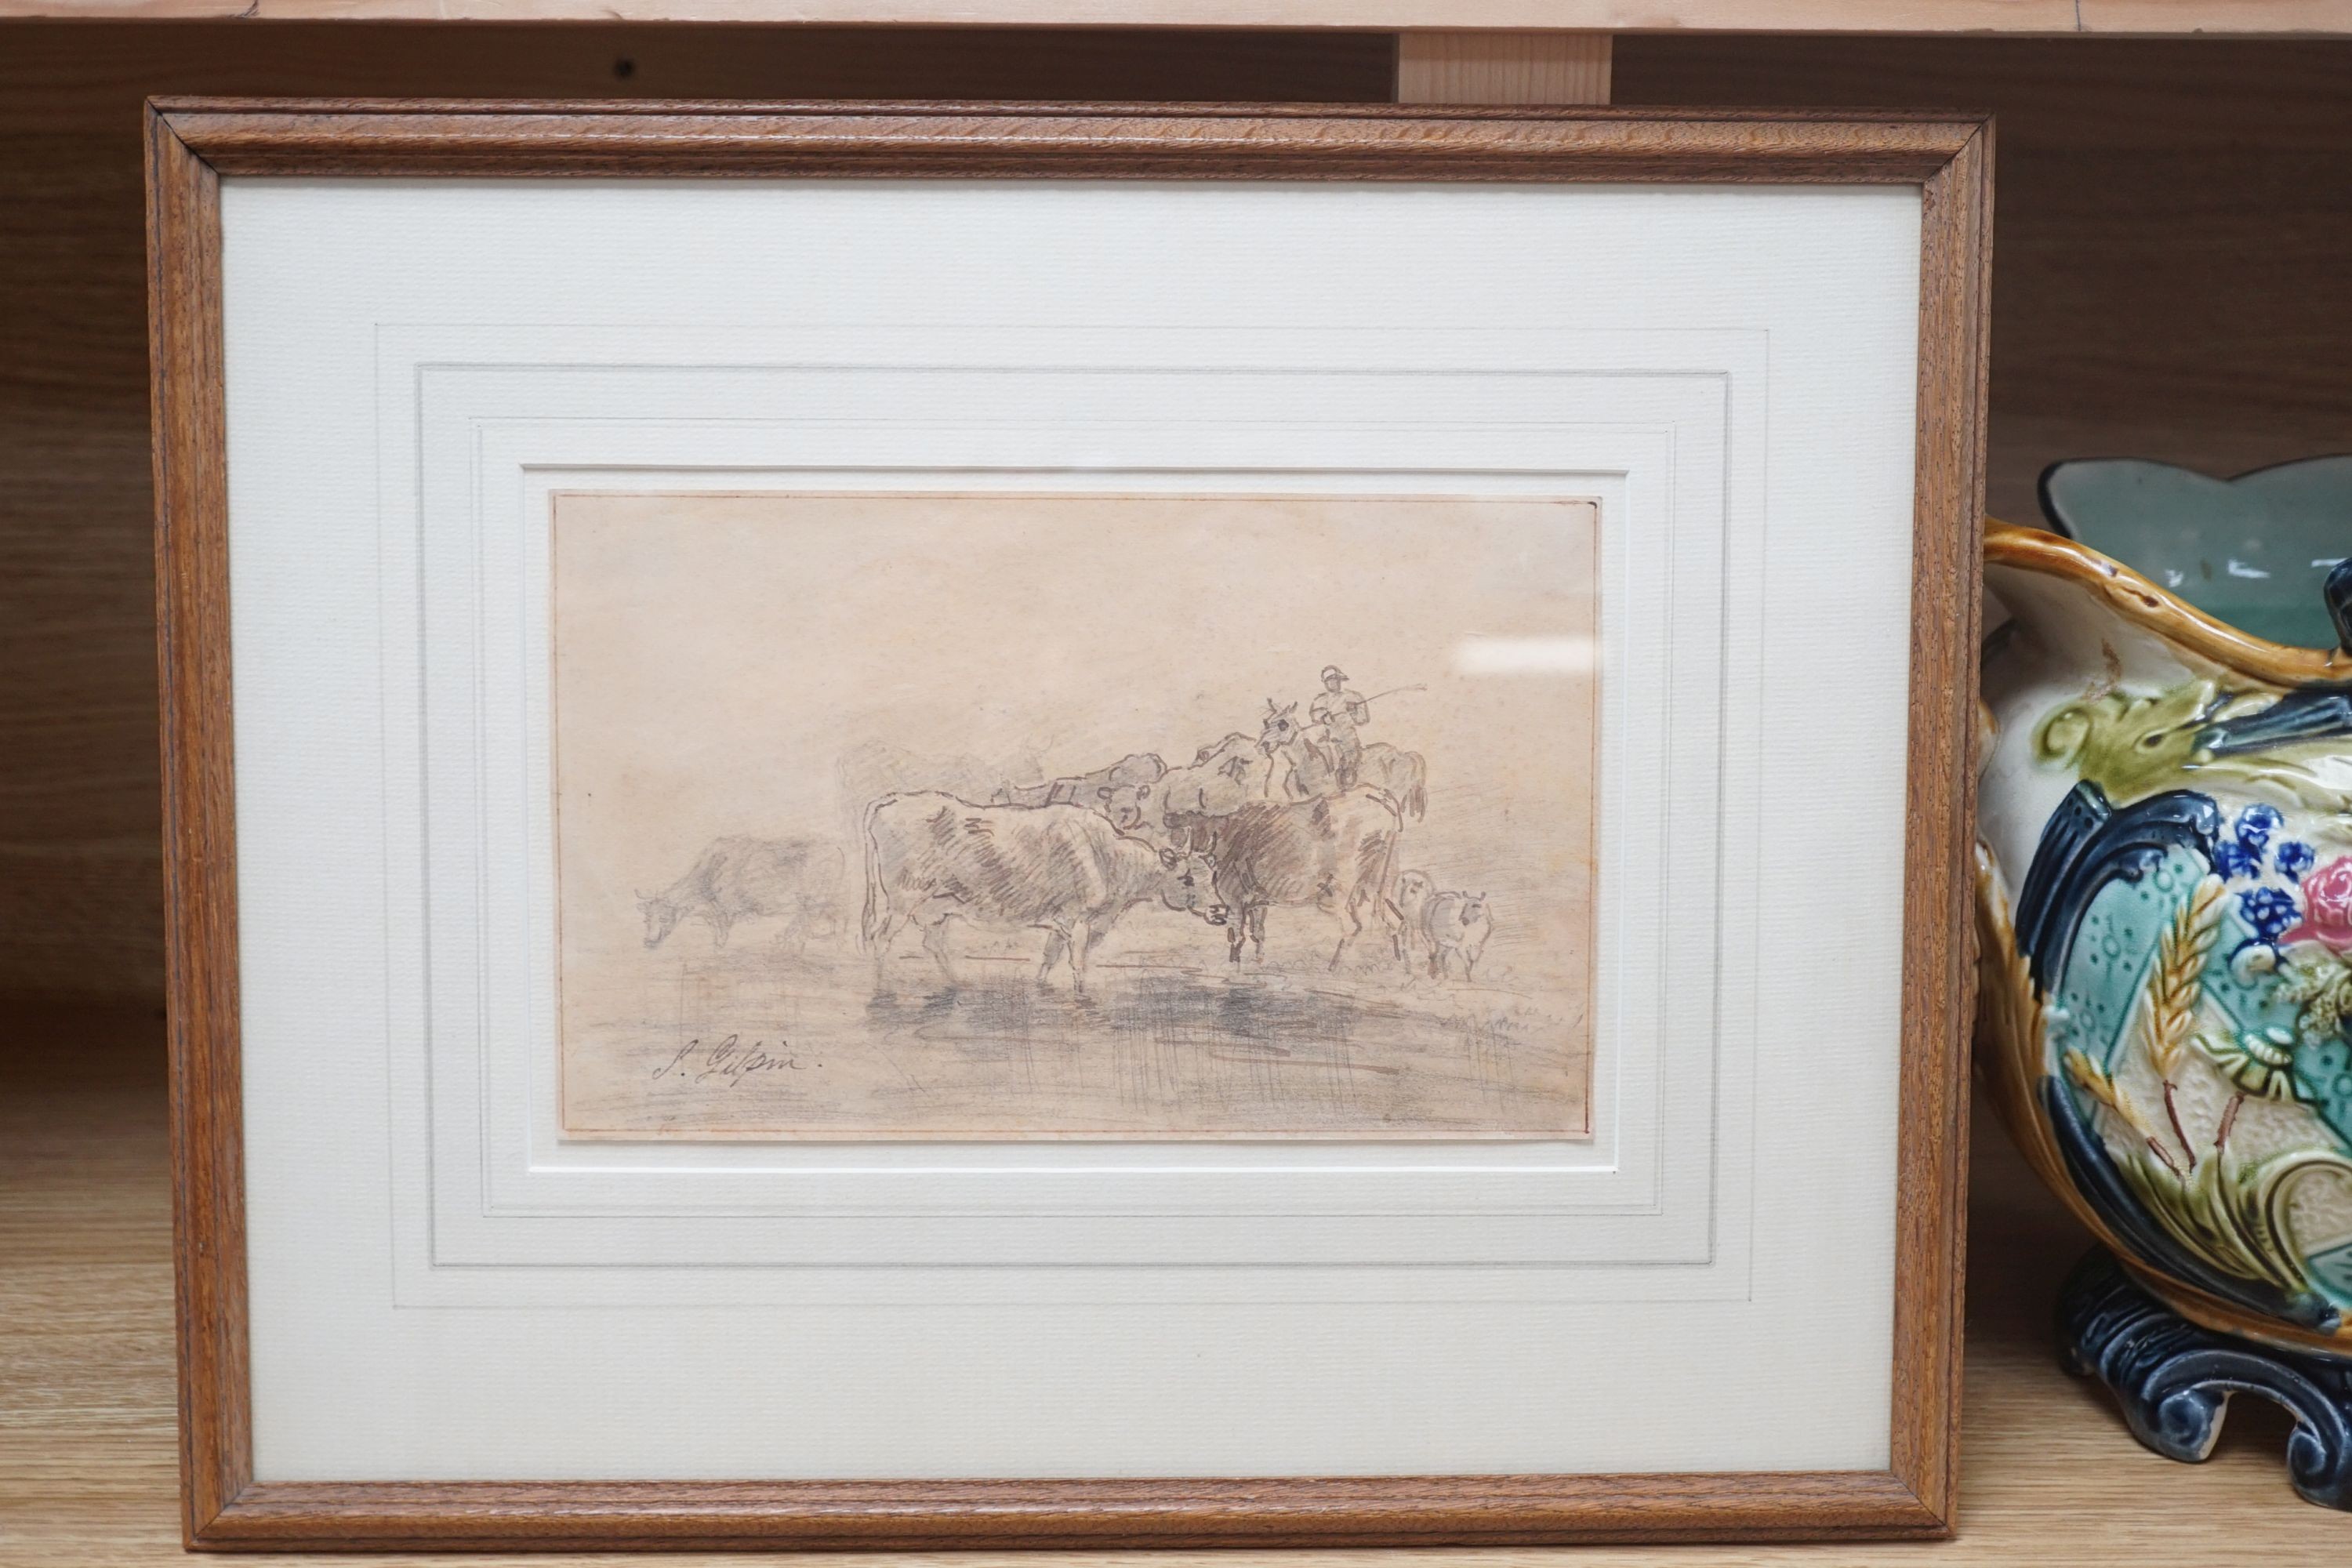 Sawrey Gilpin (1733-1807), Cattle at a ford, pencil and sepia drawing, signed, 13.5 x 21.5cm